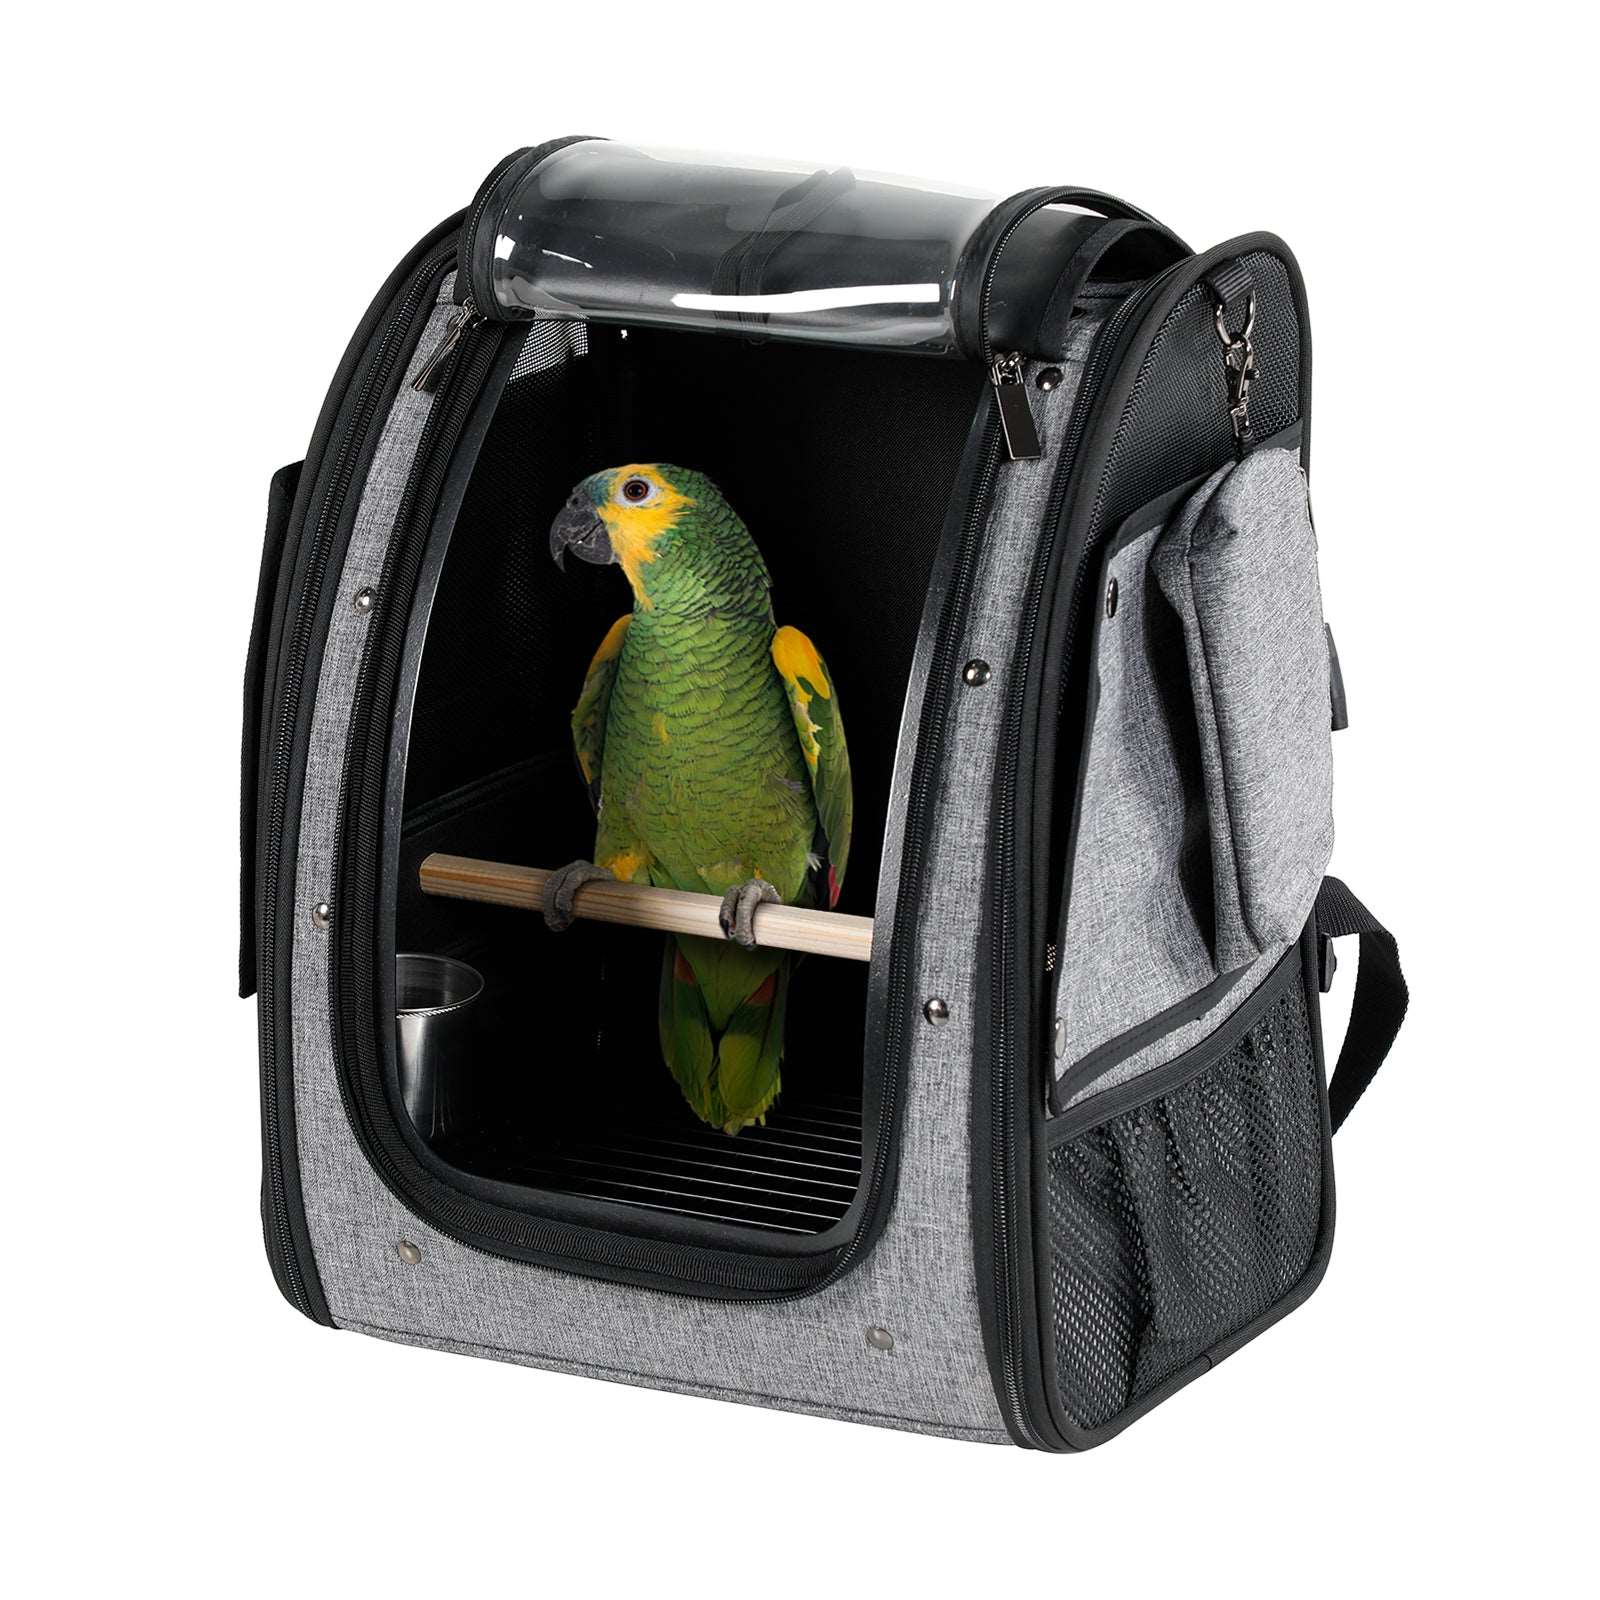 Petsfit-Bird-Carrier-with-Shade-Cover-08